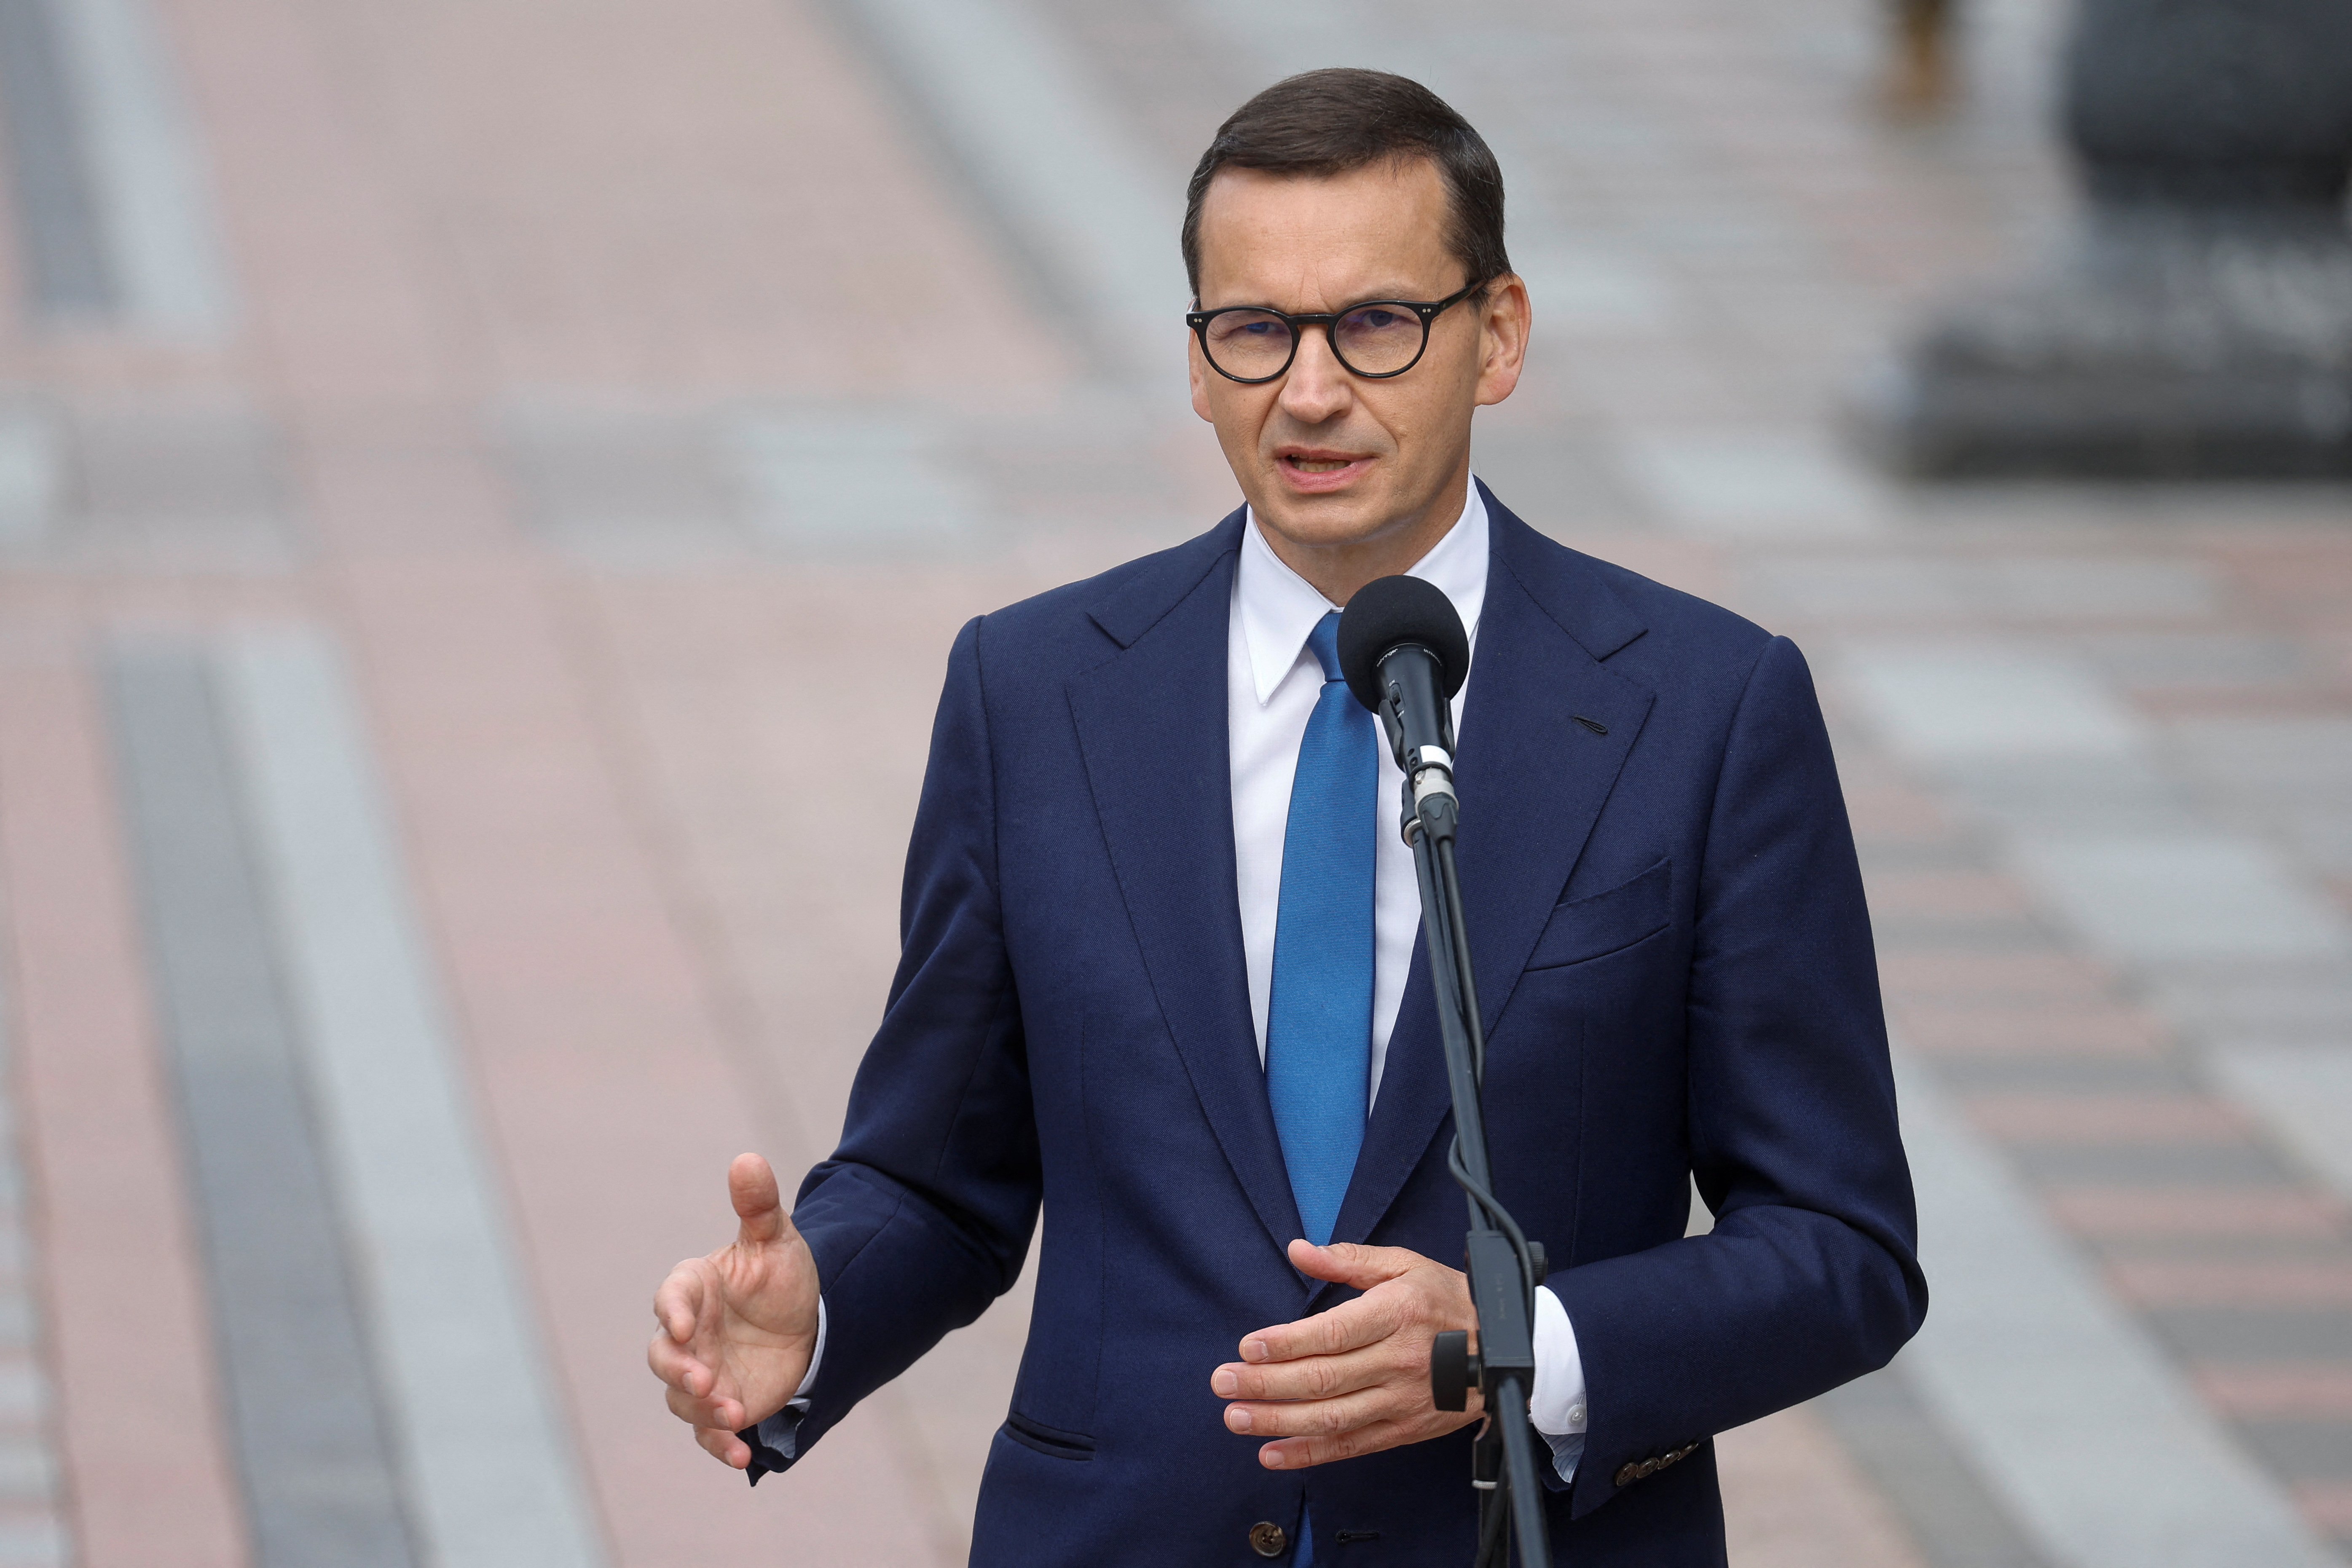 Polish Prime Minister Morawiecki speaks during a joint news briefing with Ukraine's President Zelenskiy and Latvian President Levits in Kyiv